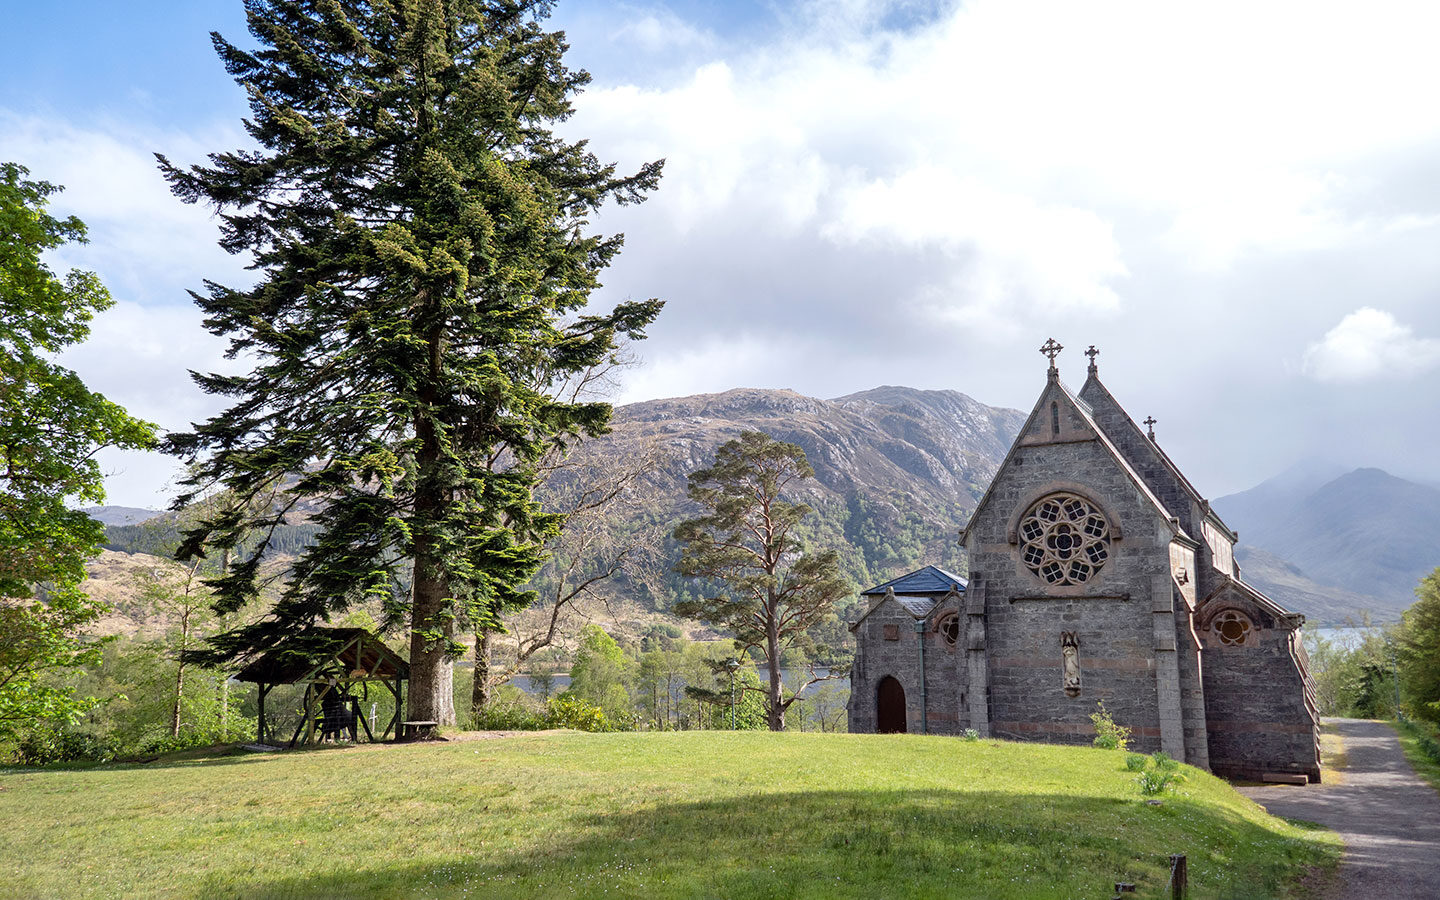 The Church of St Mary and St Finnan in Glenfinnan in Scotland